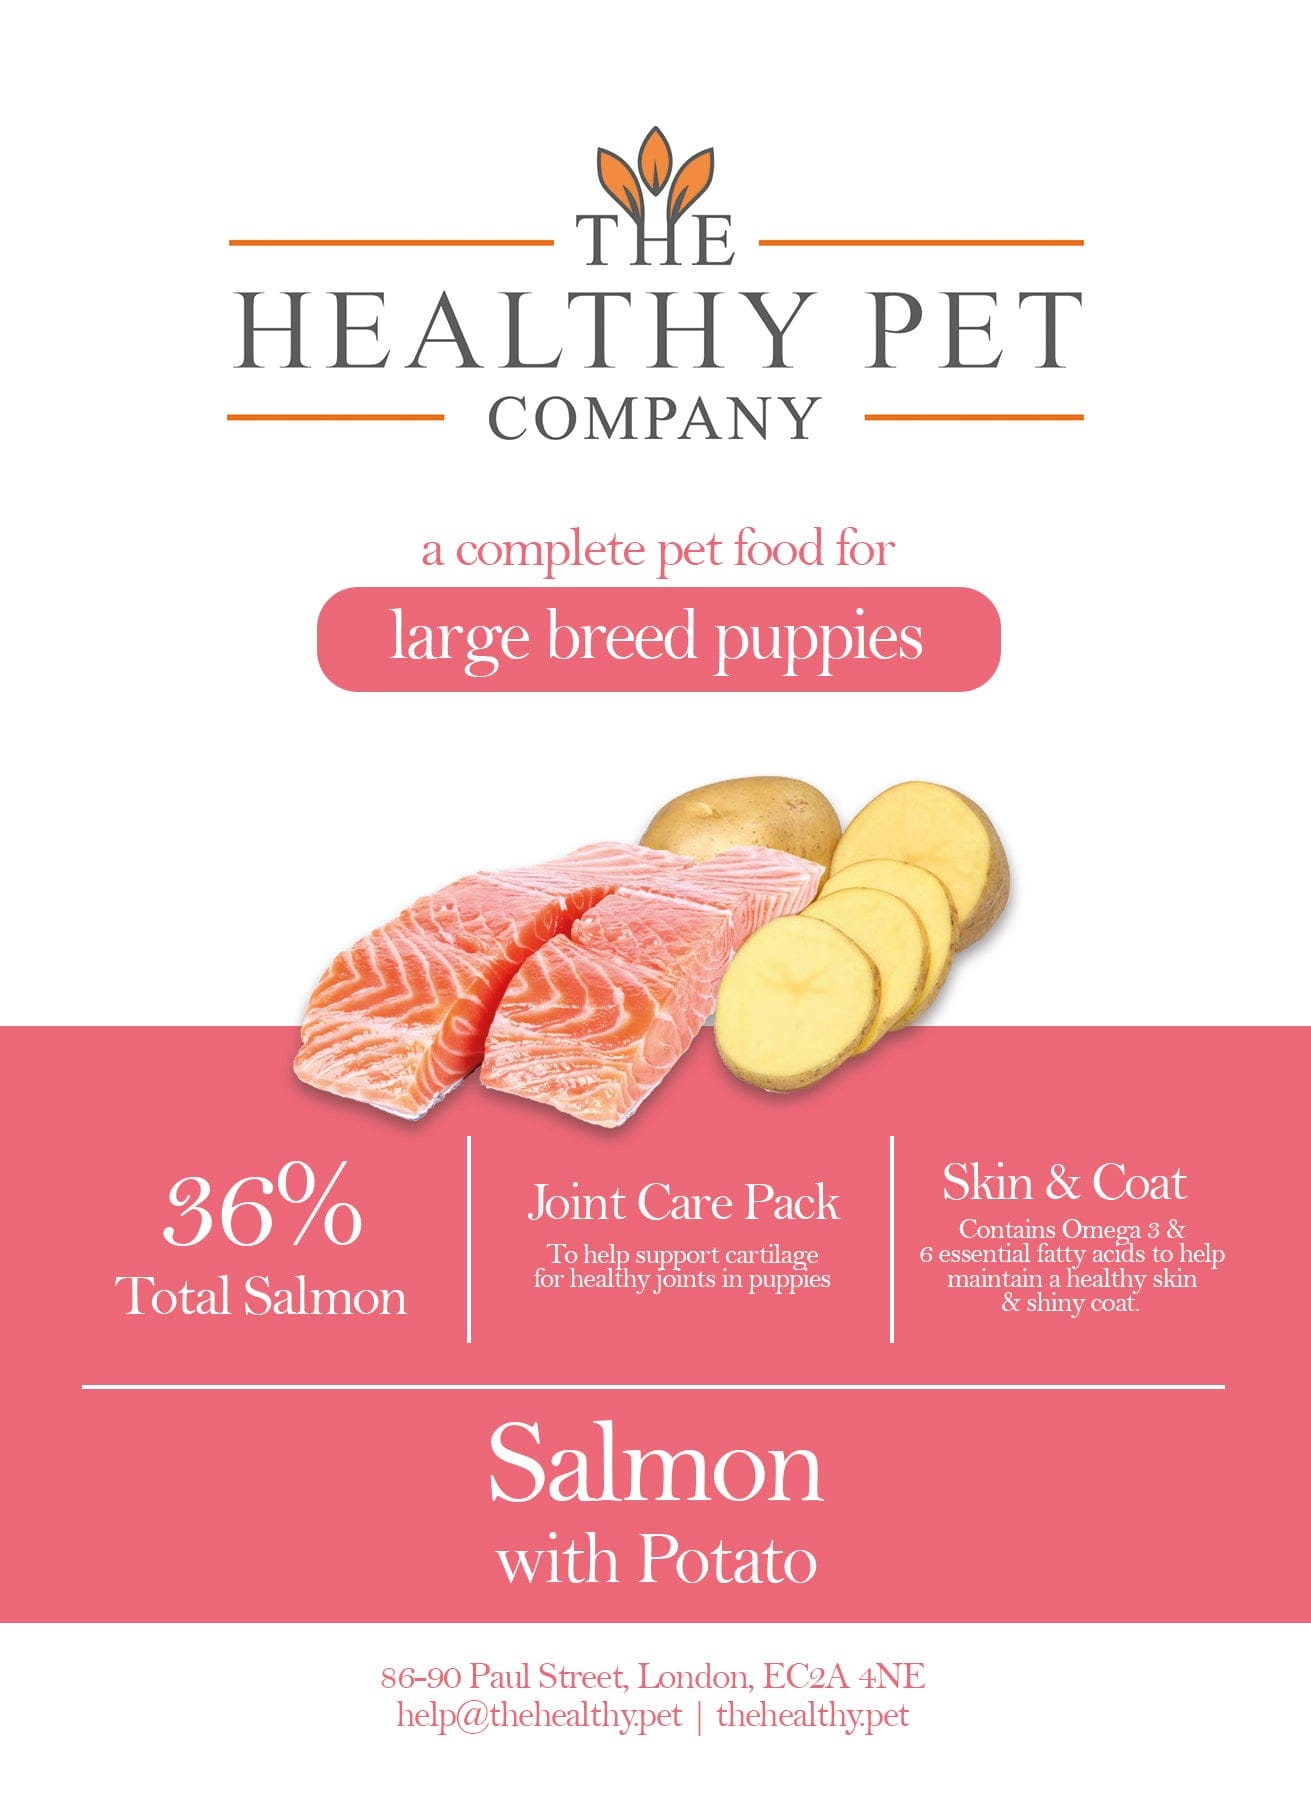 The Healthy Pet Company Complete Meal - Salmon with Potato for Large Breed Puppies - The Healthy Pet Company